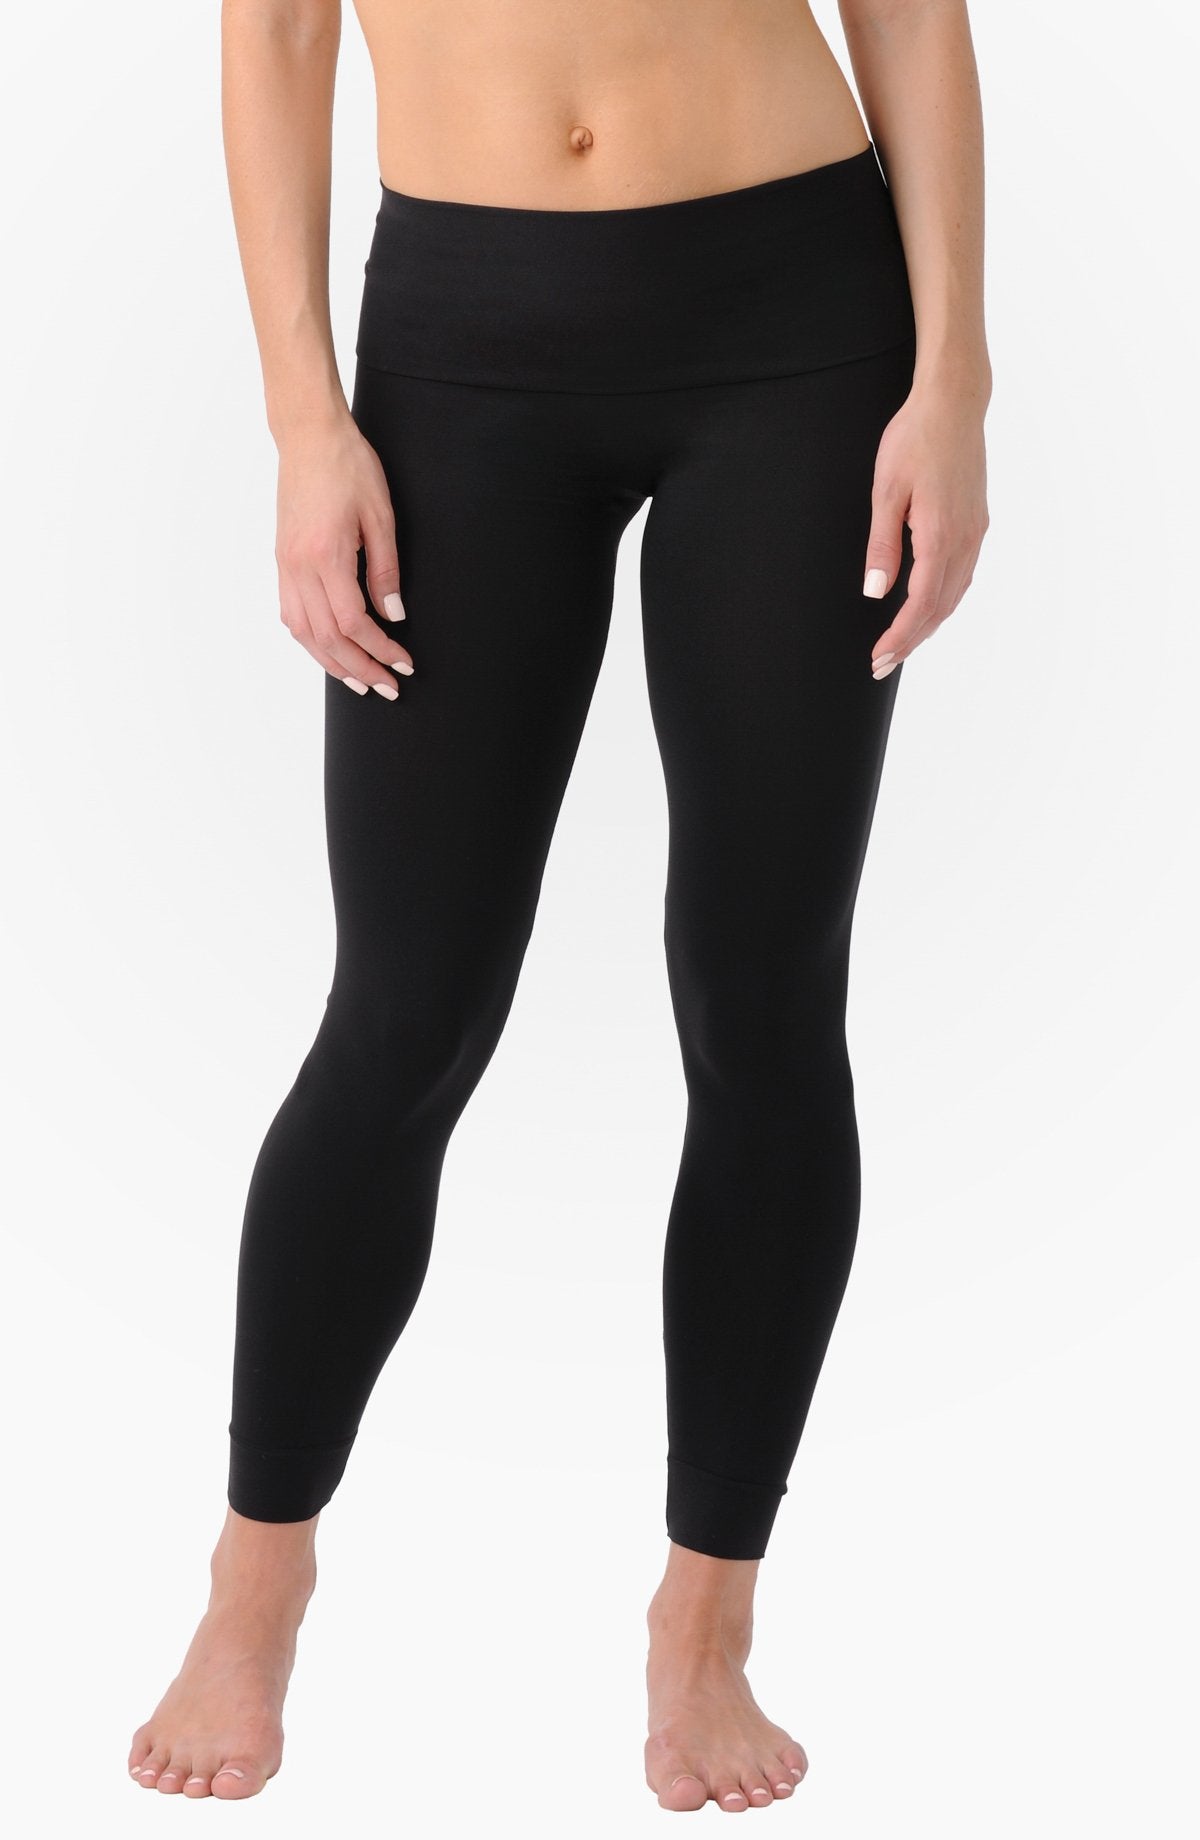 Maternity Bump Support Leggings - Buy 3 Save 30% – Belly Bandit